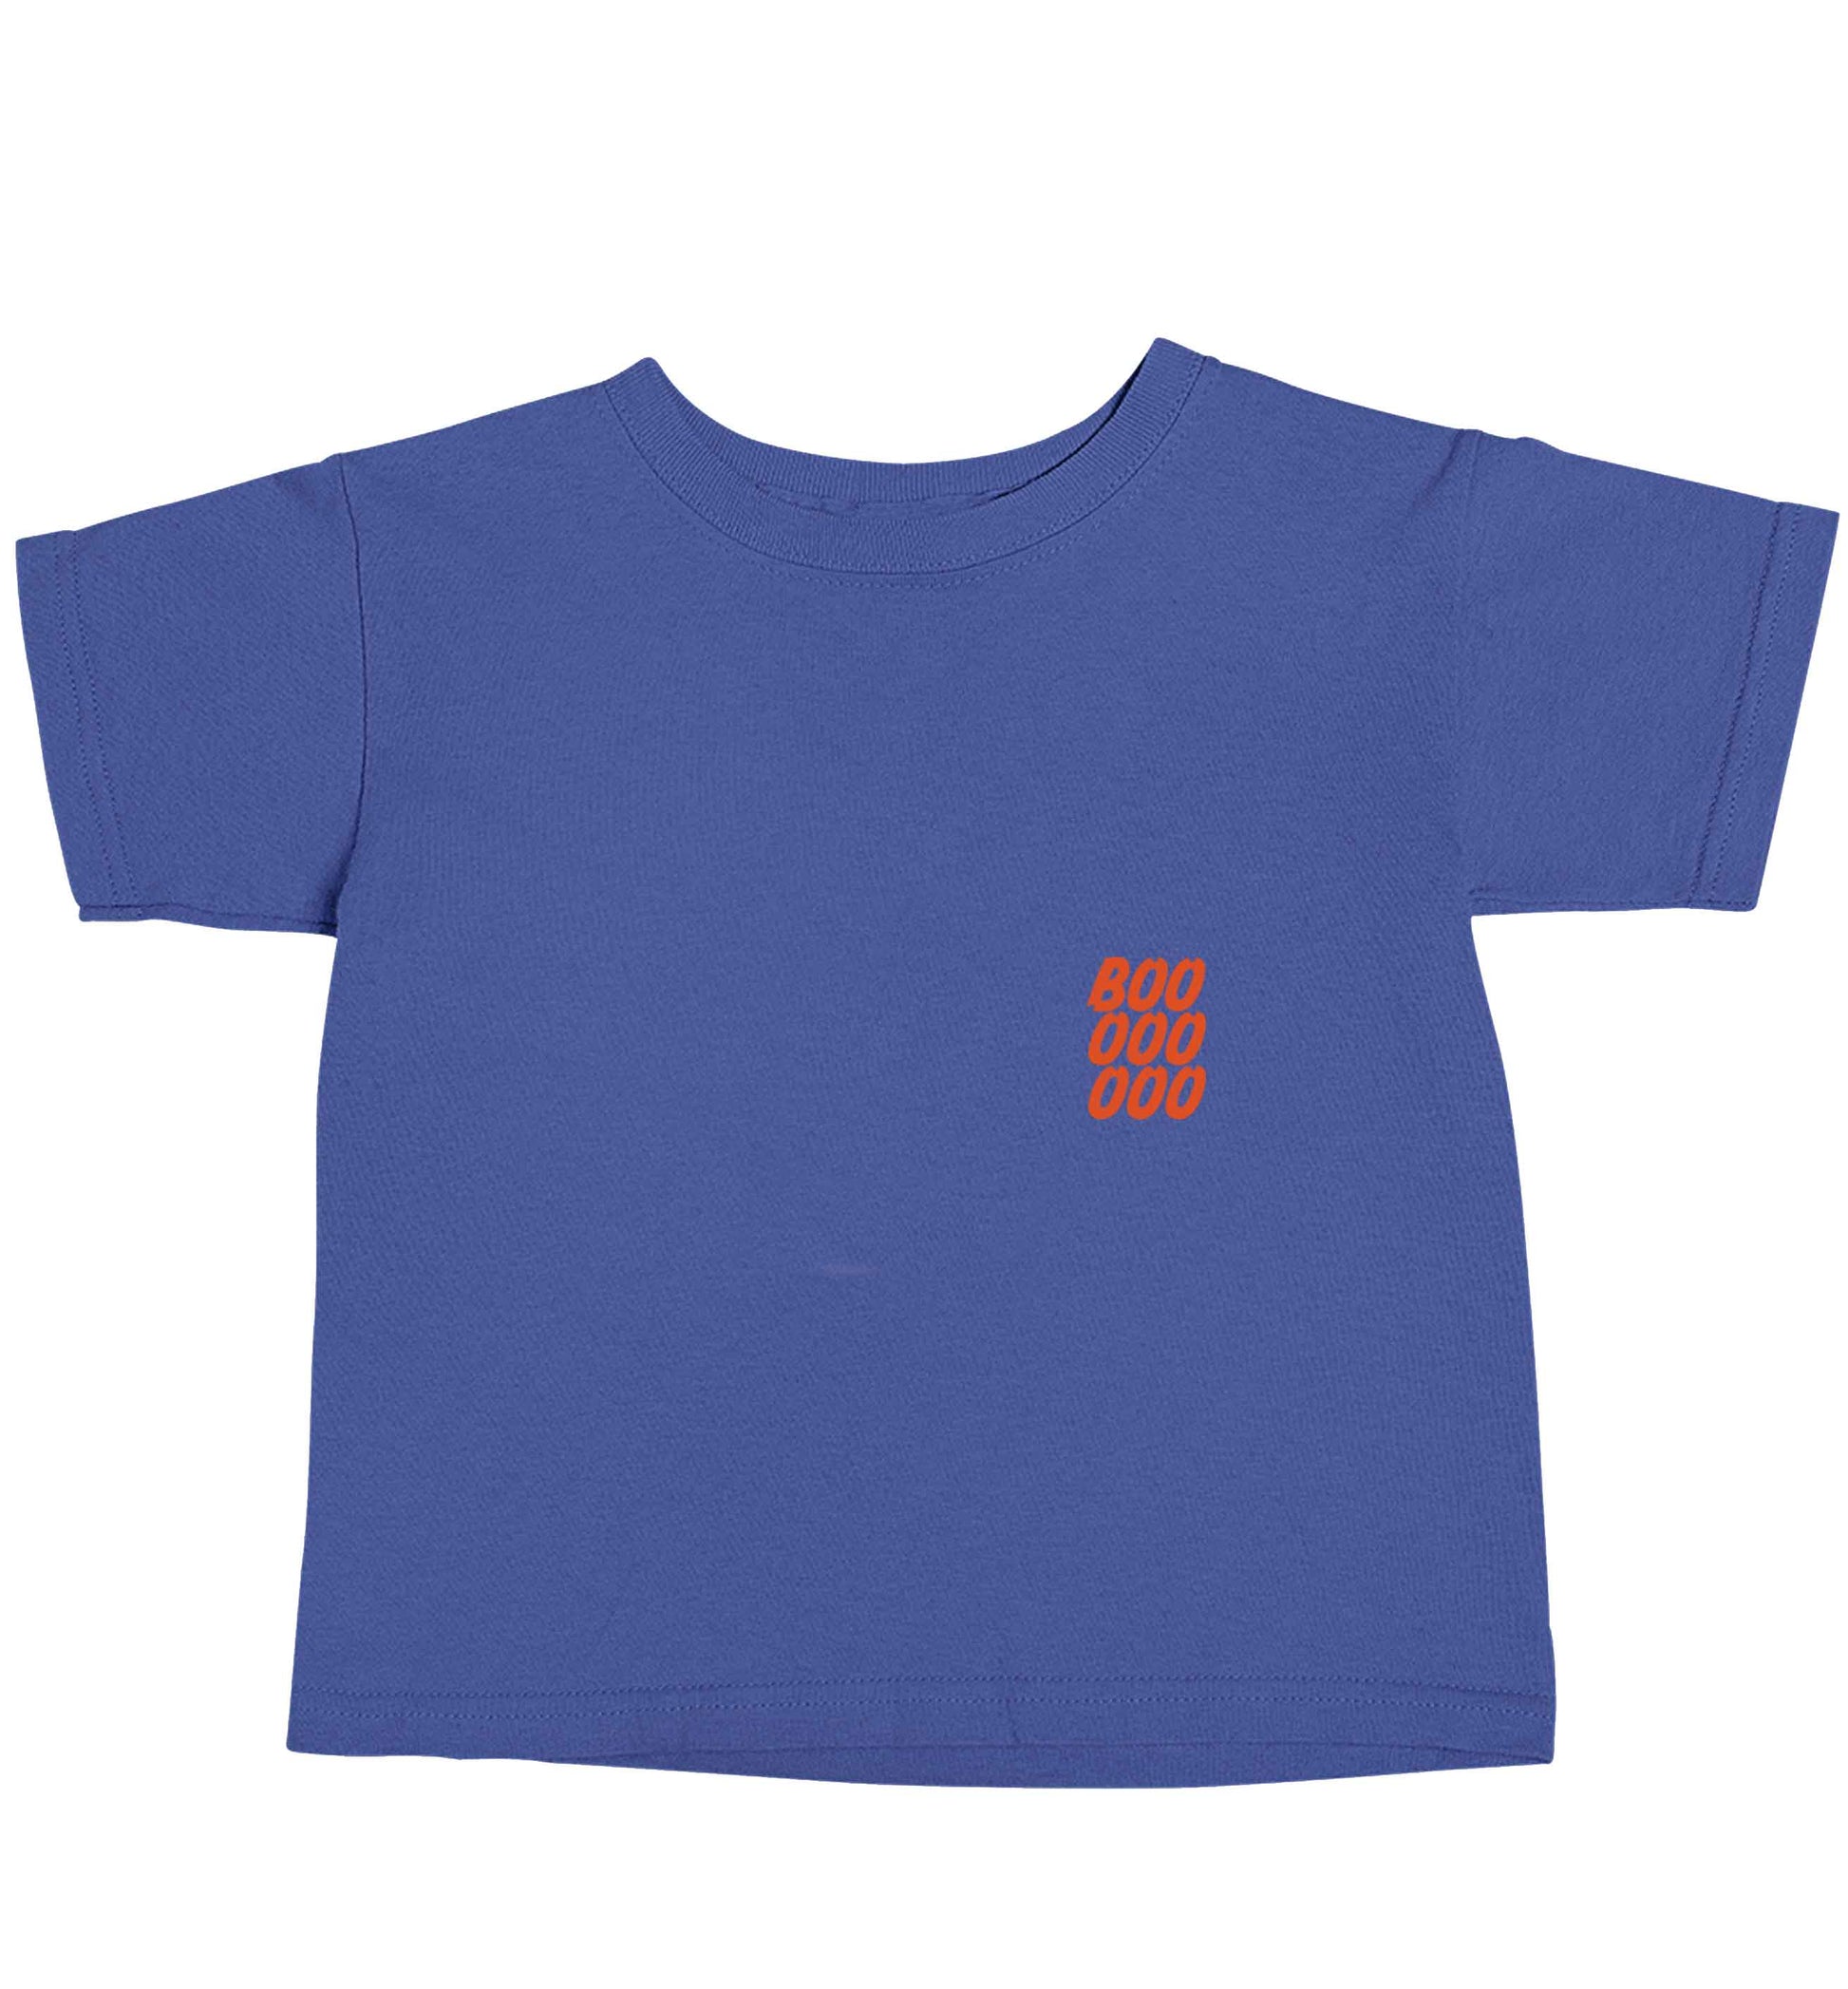 Boo pocket blue baby toddler Tshirt 2 Years